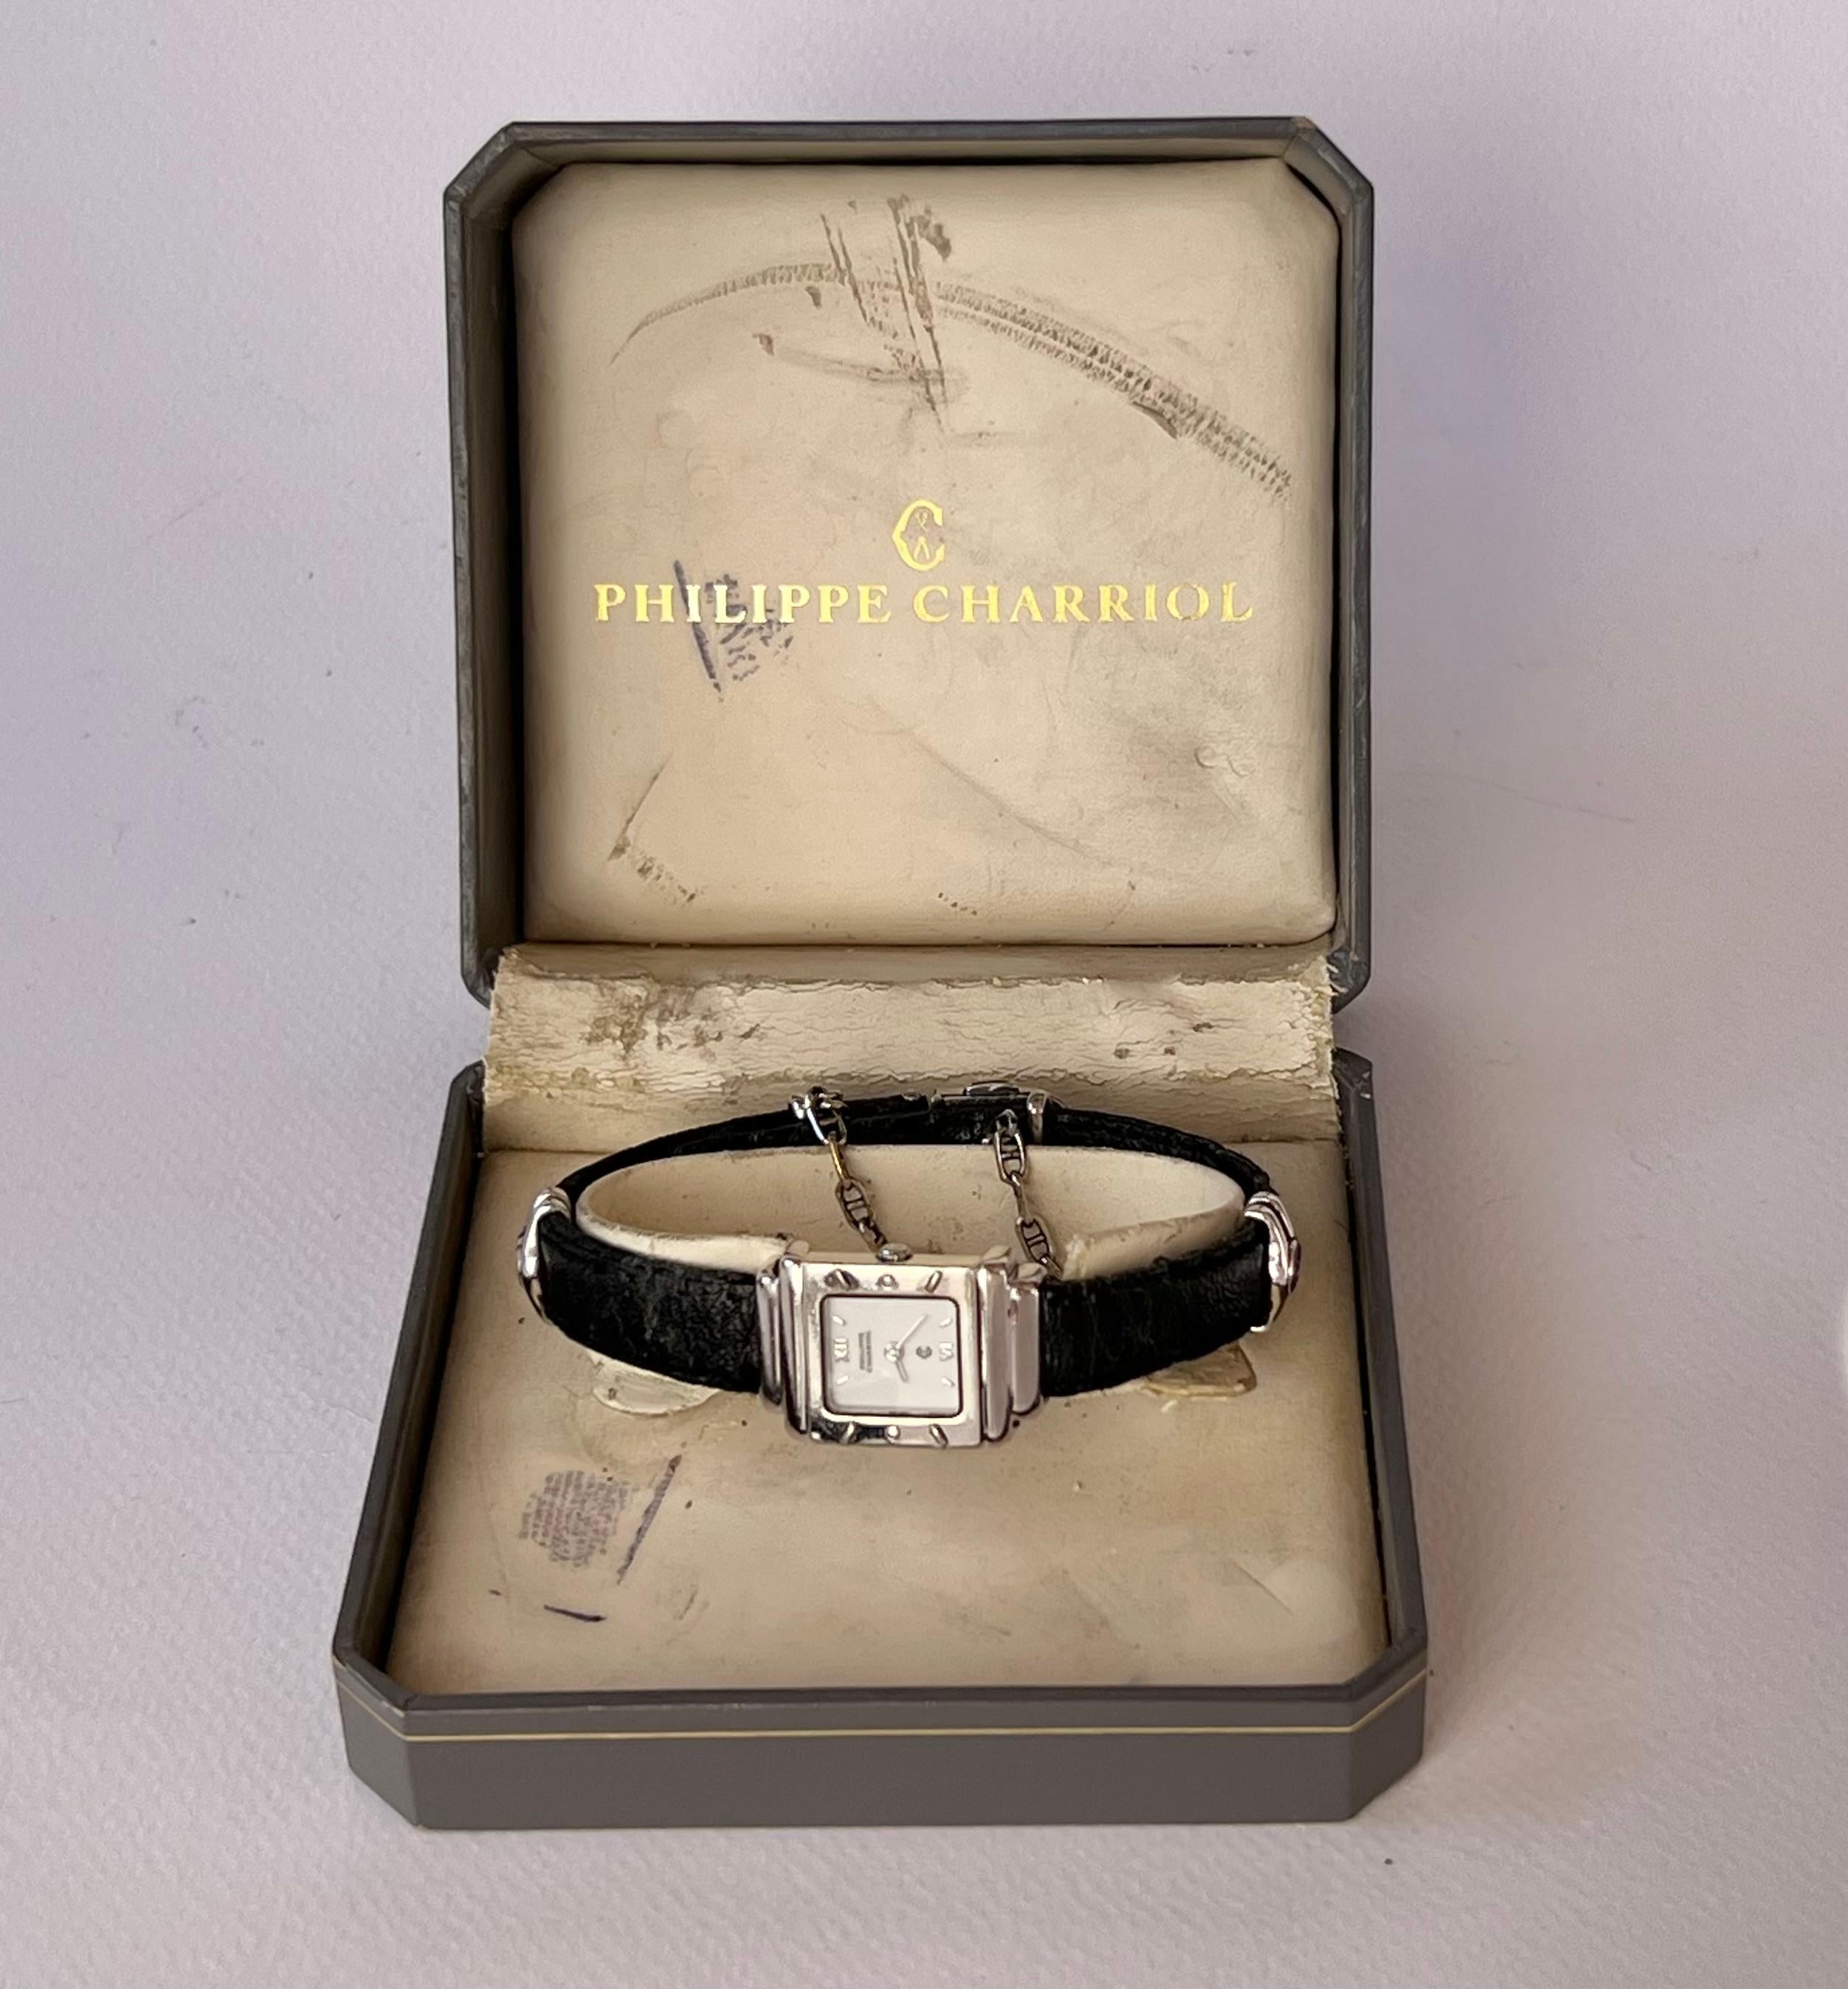 Brand : Philippe Charriol  

Model:  Saint-Tropez  

Ref: 6007909  

Country Of Manufacture: Switzerland

Movement: Quartz 

Case Material:  Sterling Silver

Measurements : 20mm x 28mm diameter (excluding crown ) 

Band Type : Black Leather  

Band